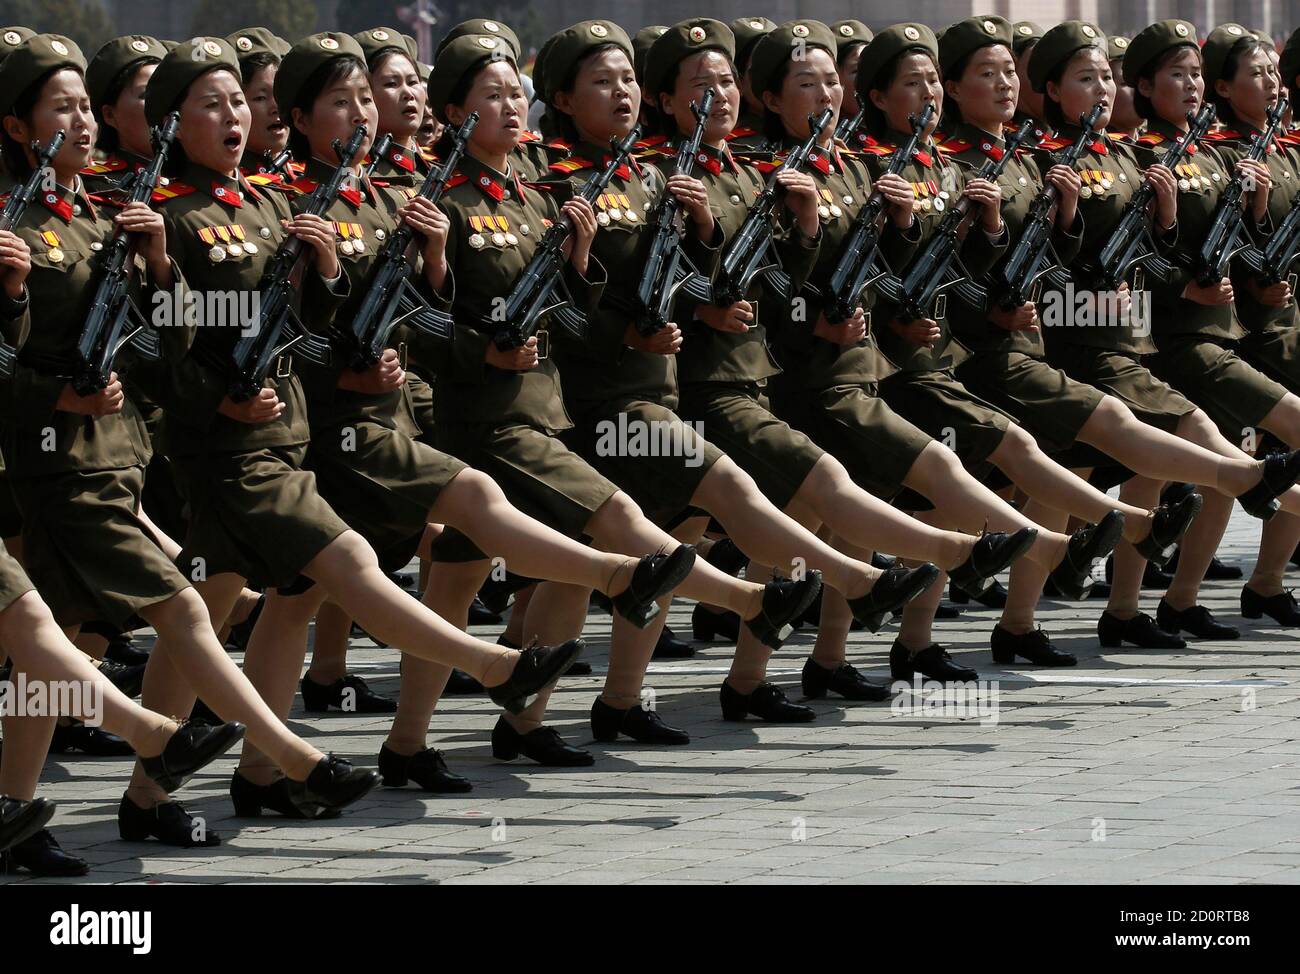 Soldiers shout as they march past the podium during a military parade to celebrate the centenary of the birth of North Korea founder Kim Il-sung in Pyongyang April 15, 2012. REUTERS/Bobby Yip (NORTH KOREA - Tags: POLITICS MILITARY ANNIVERSARY) Stock Photo